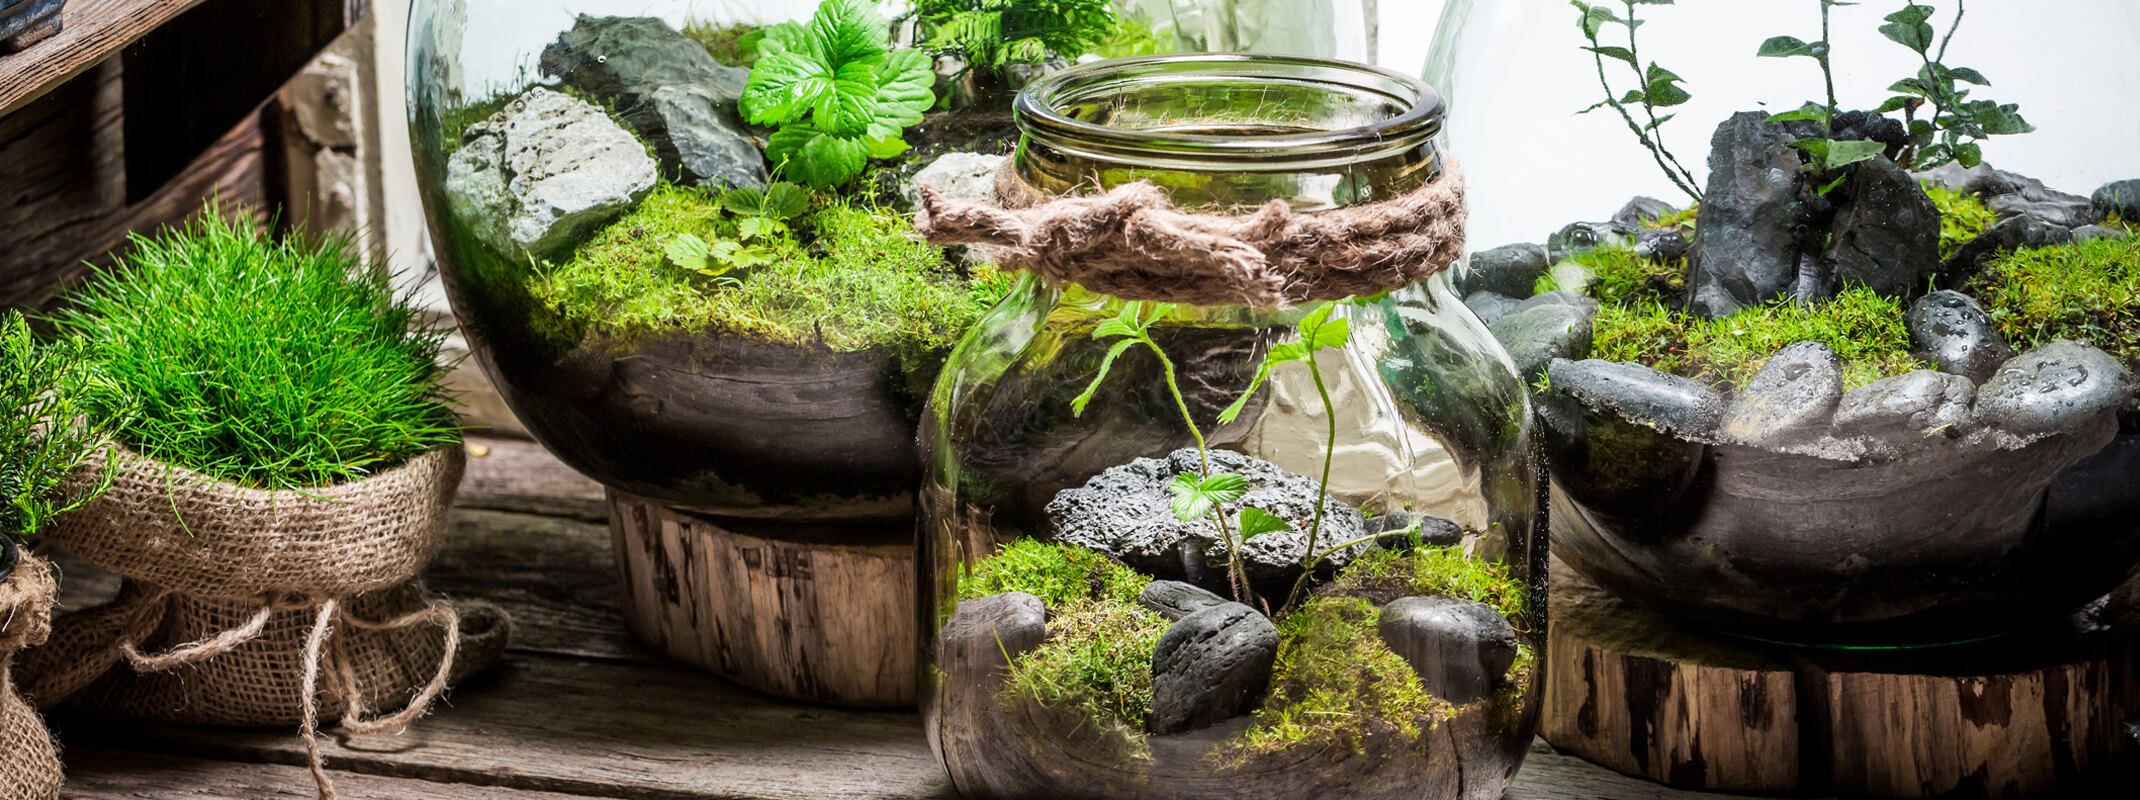 3 terrariums created by filling jars with dirt, moss, rocks and plants and placed on a wooden table next to a bag of moss 